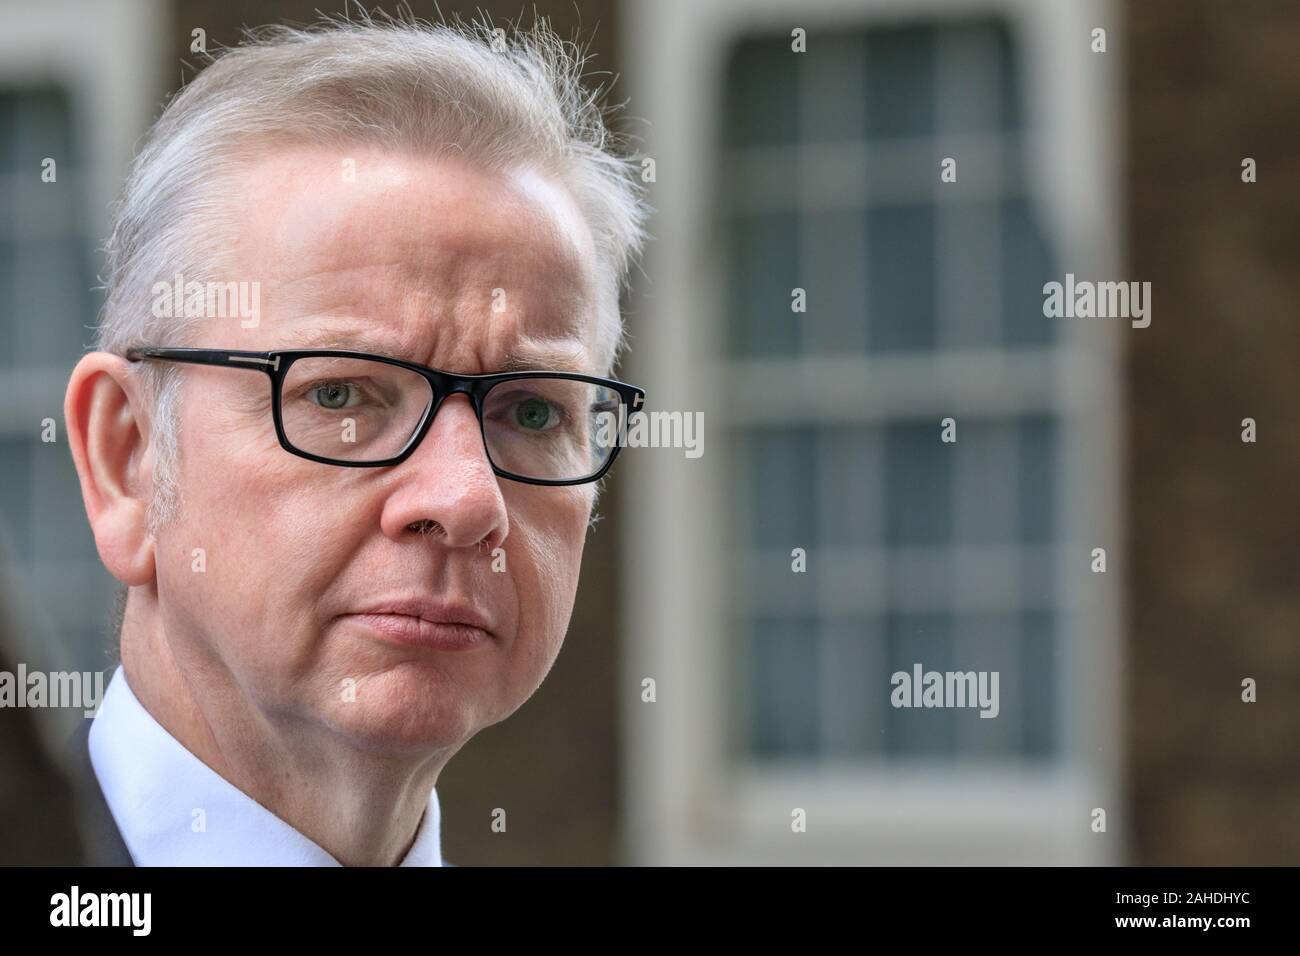 Michael Gove, Cabinet Minister, Chancellor of the Duchy of Lancaster, British Conservative Party politician, close up of face Stock Photo